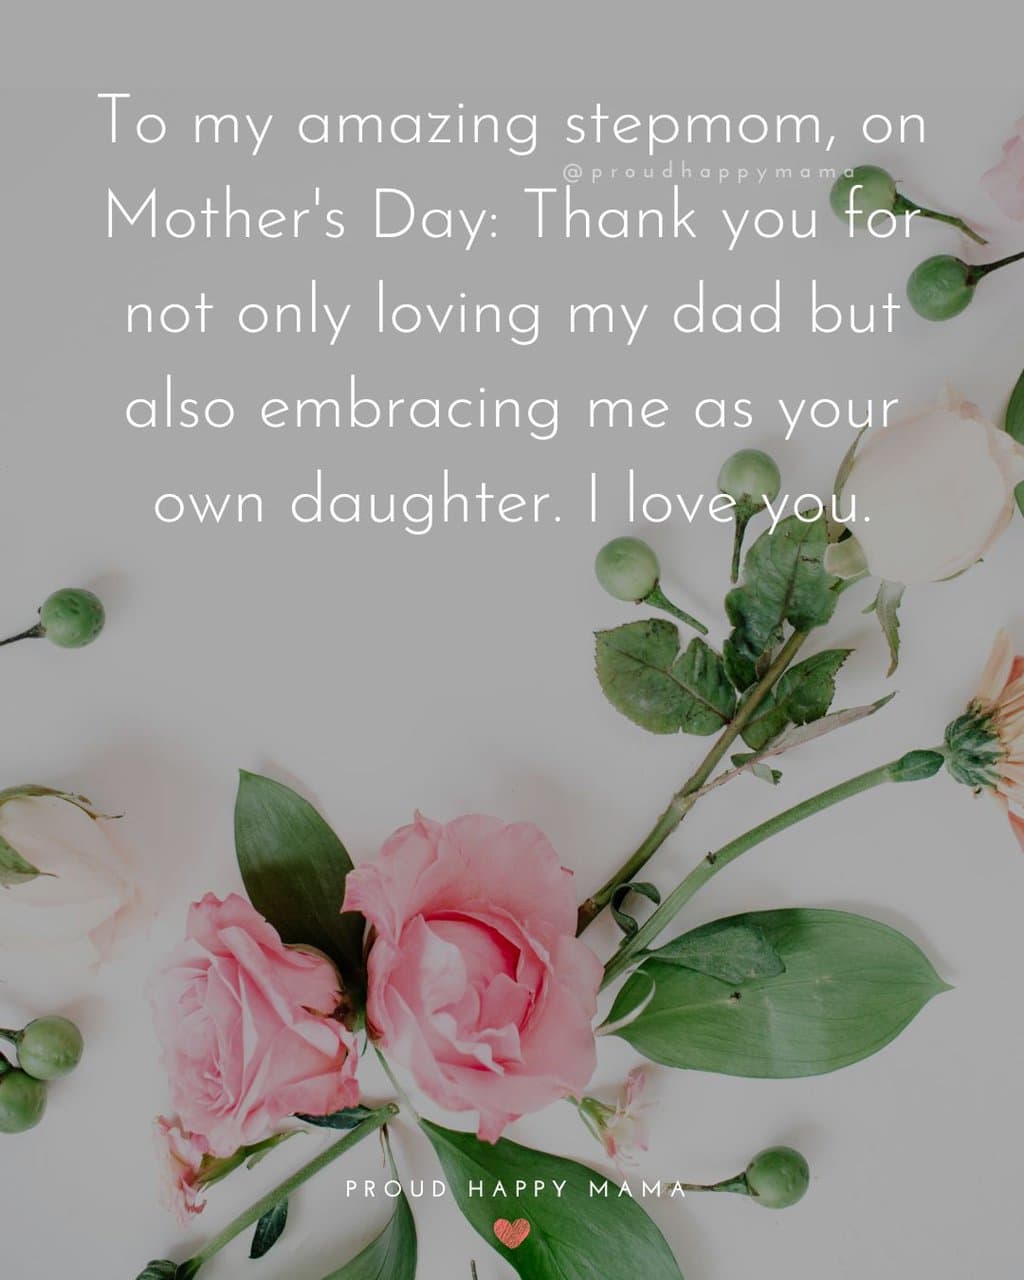 Mother's day quotes for stepmom from daughter